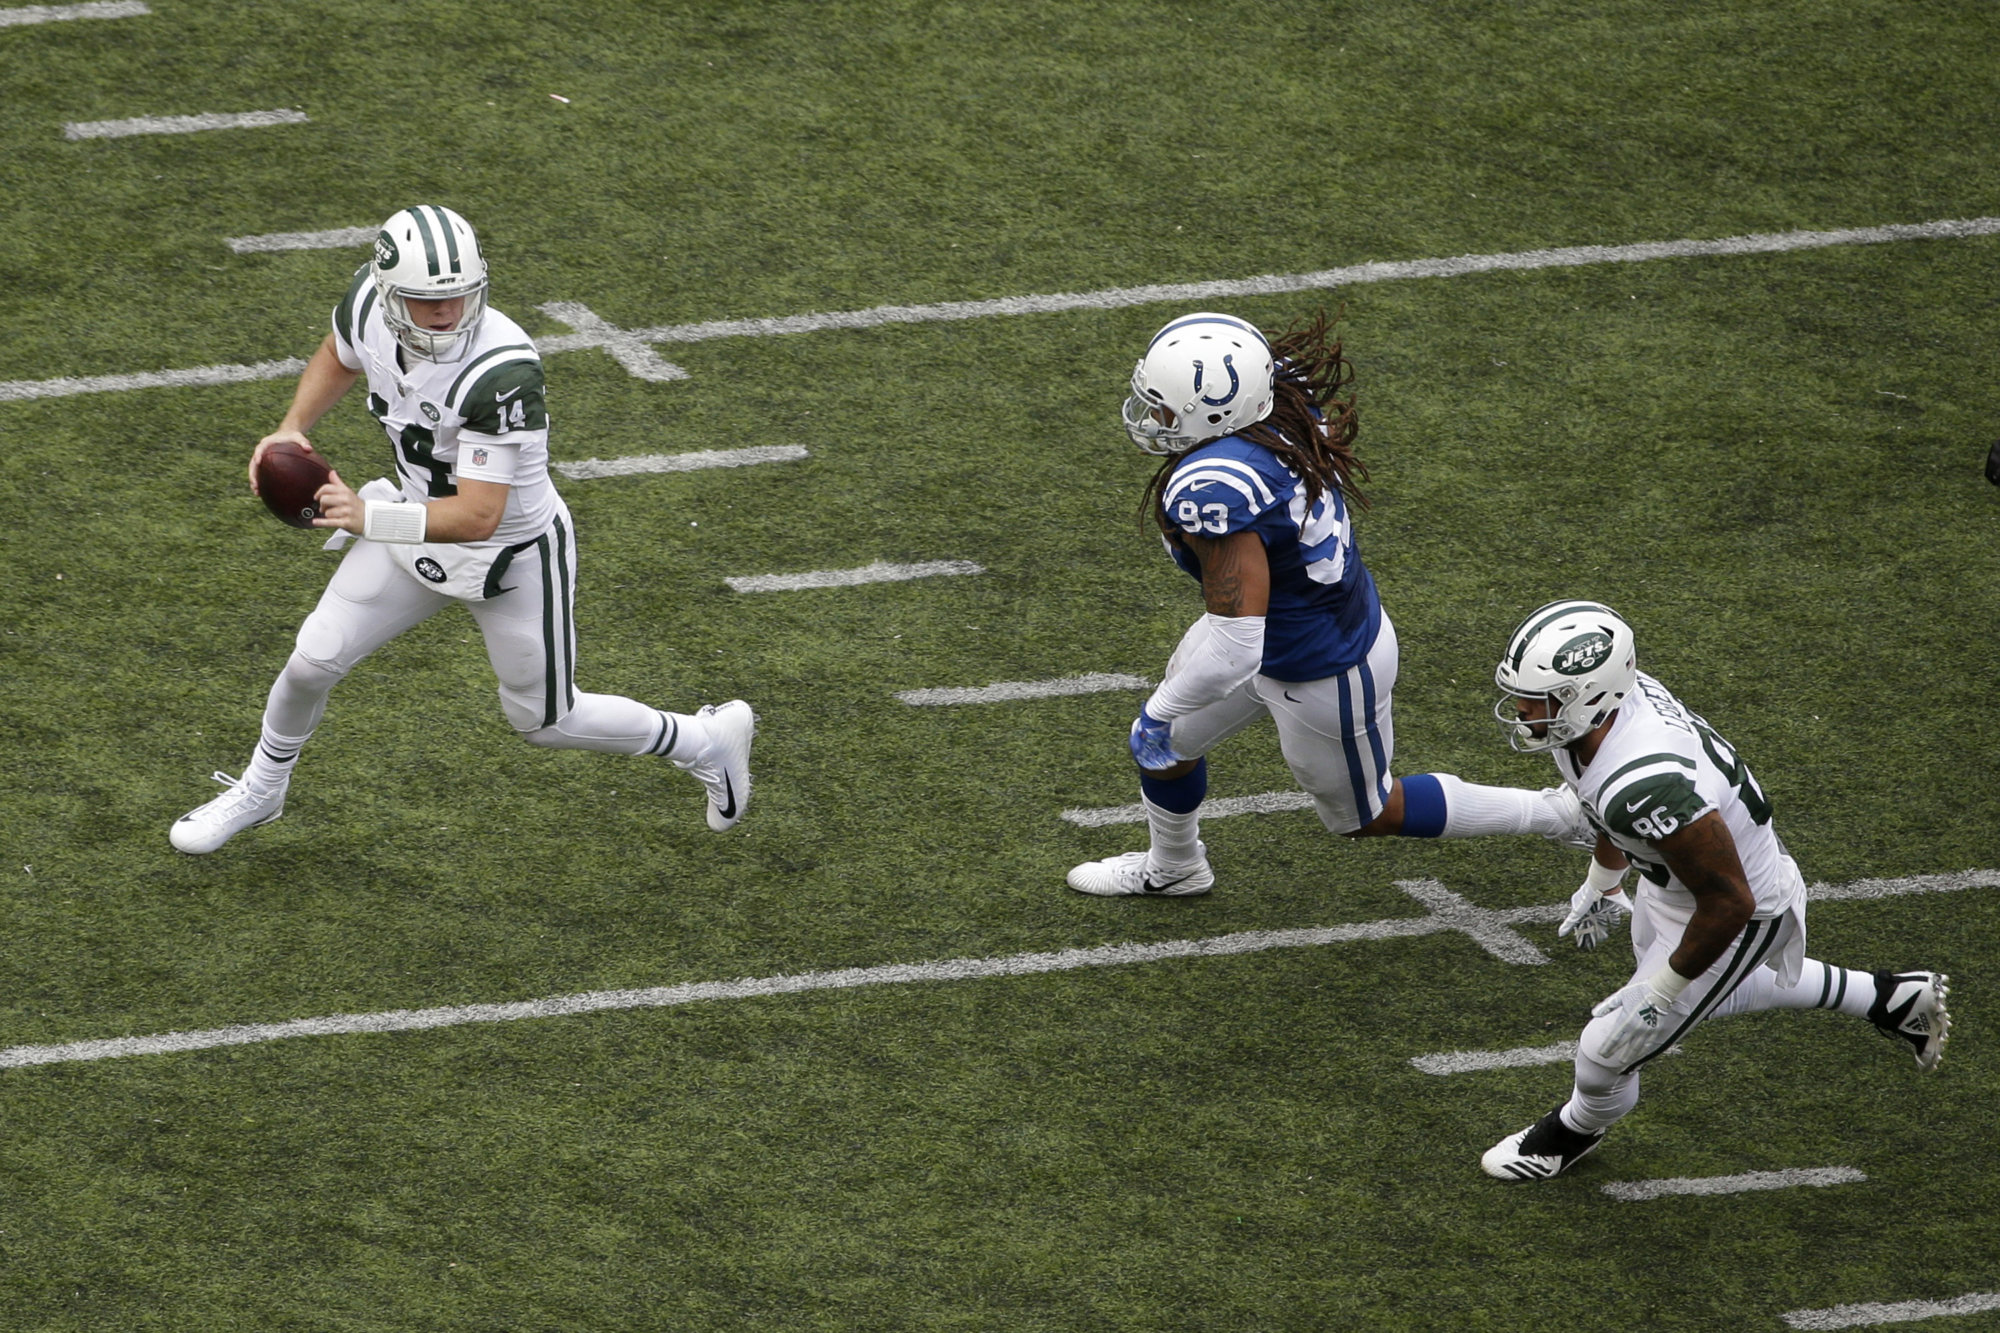 New York Jets quarterback Sam Darnold (14) scrambles as Indianapolis Colts defensive end Jabaal Sheard (93) chases him during the second half of an NFL football game, Sunday, Oct. 14, 2018, in East Rutherford, N.J. (AP Photo/Seth Wenig)